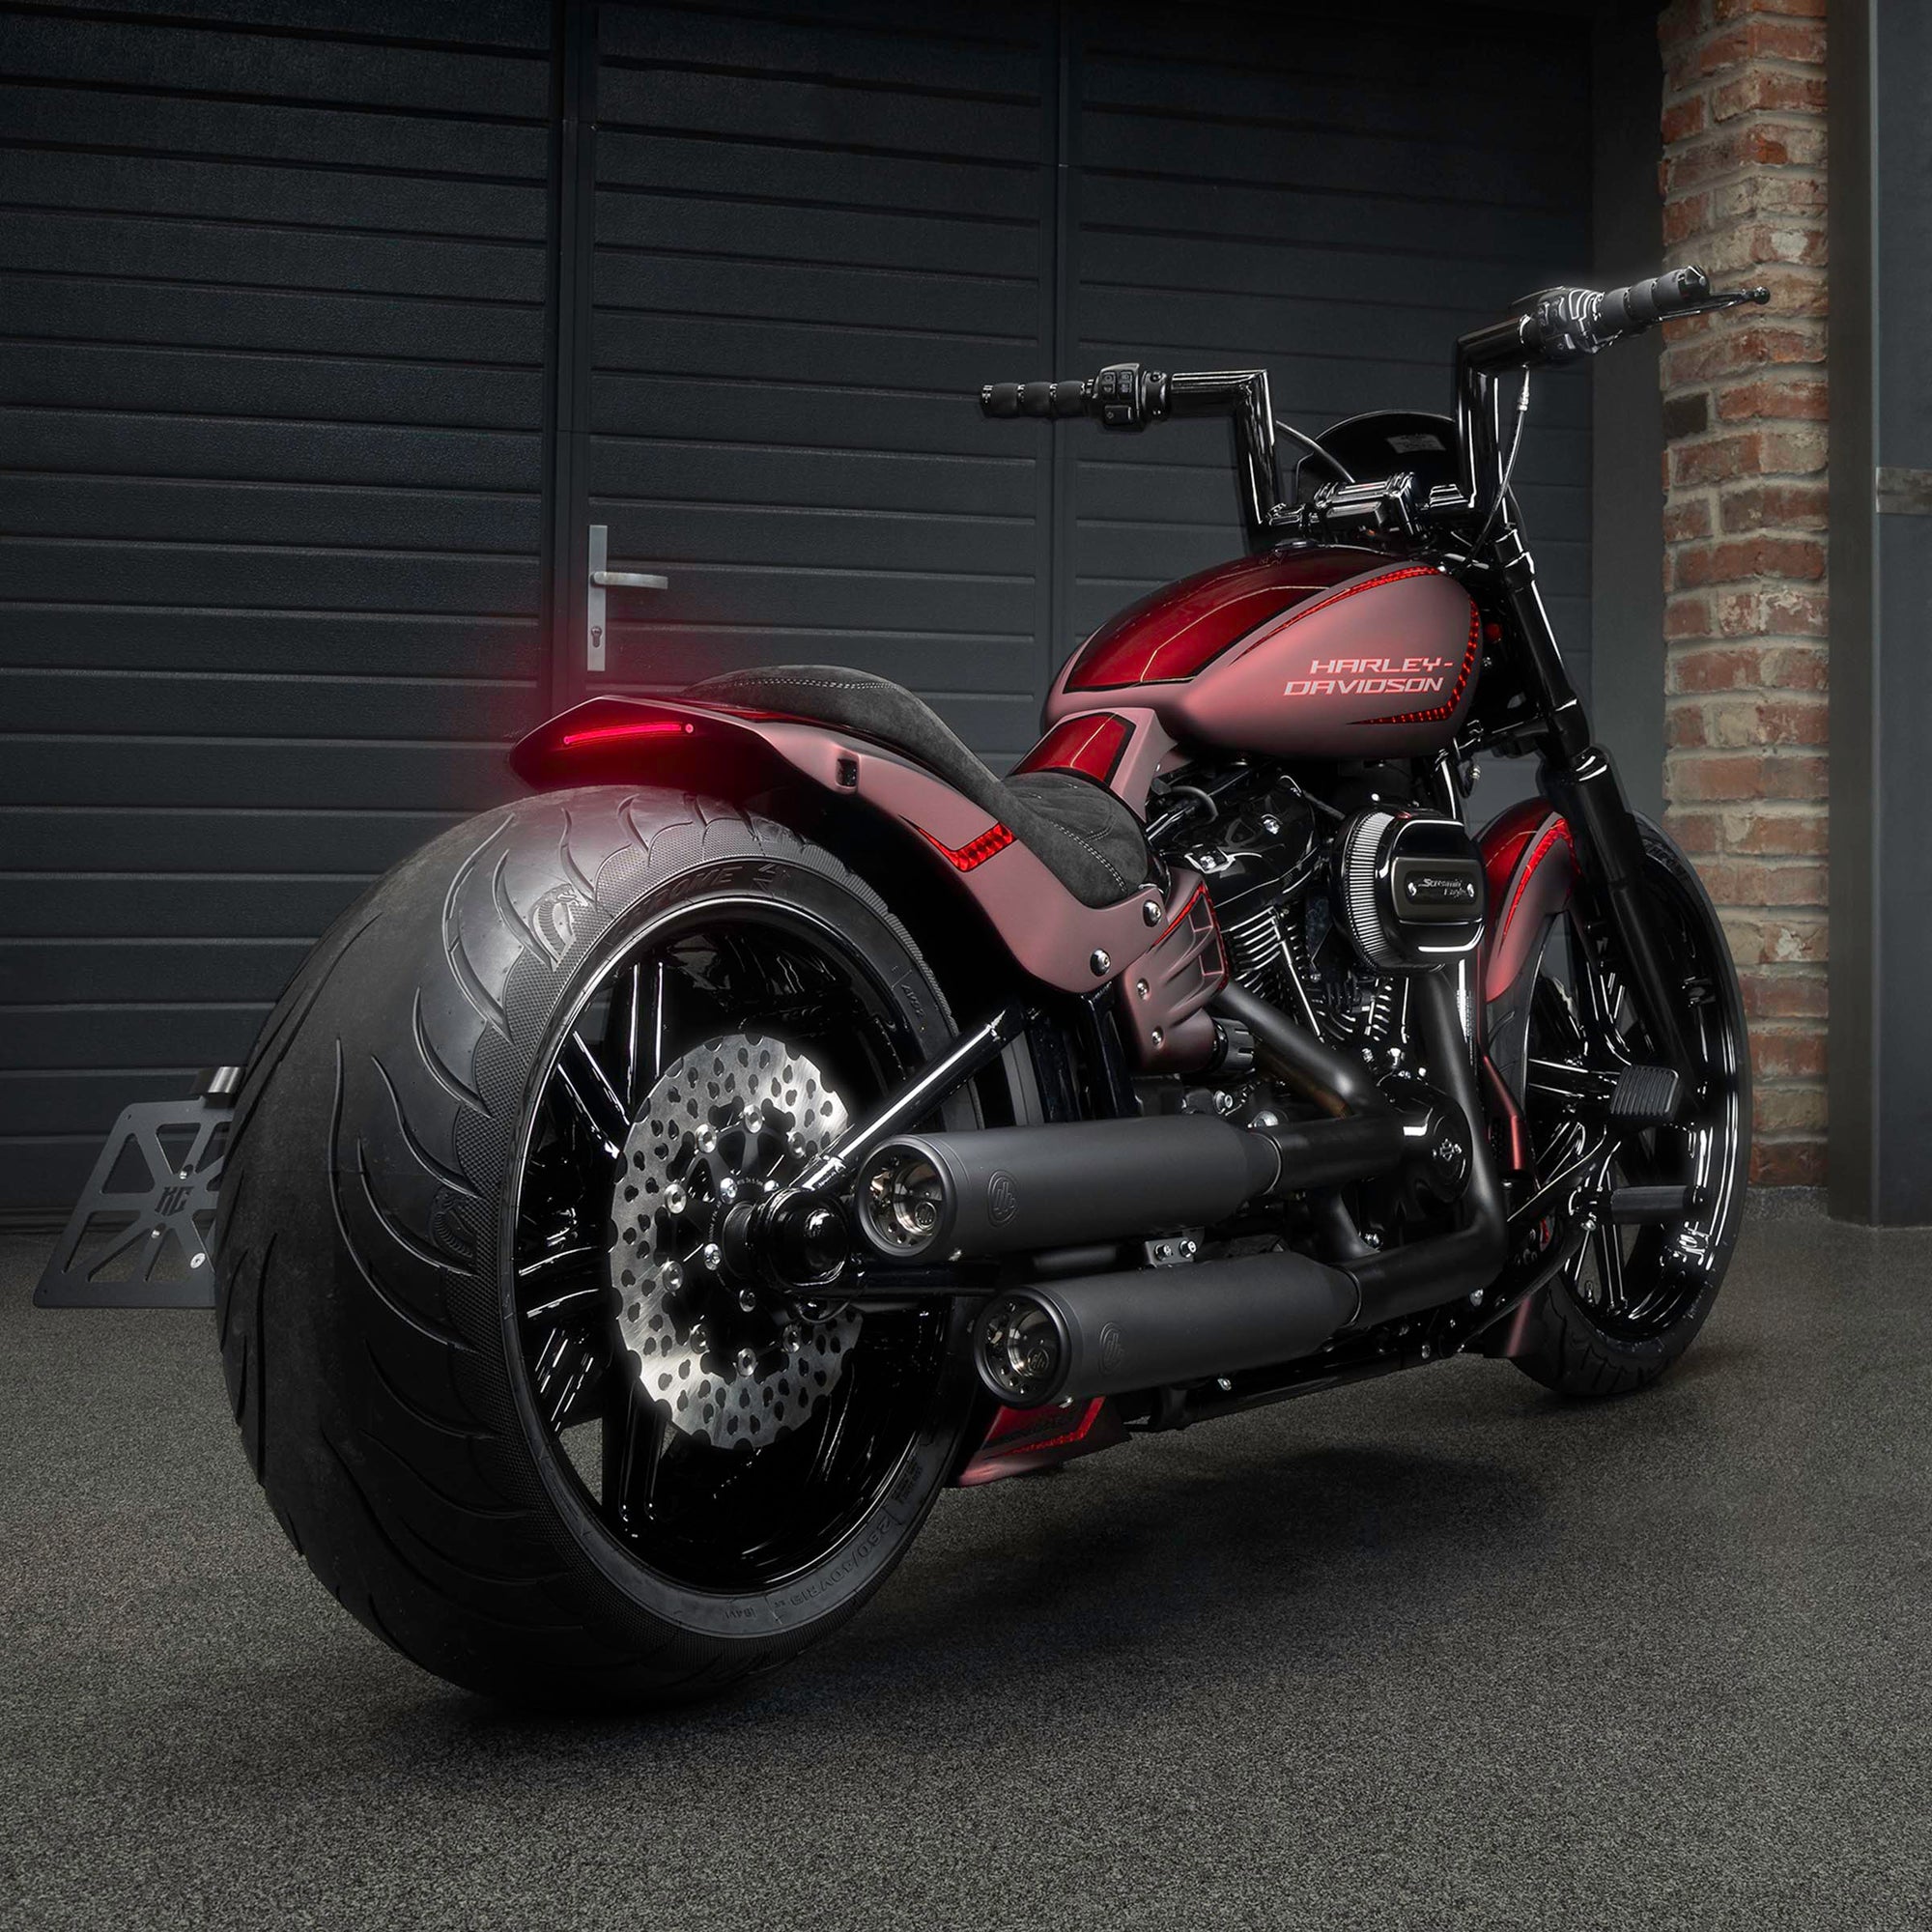 Harley Davidson motorcycle with Killer Custom parts from the rear in a modern garage